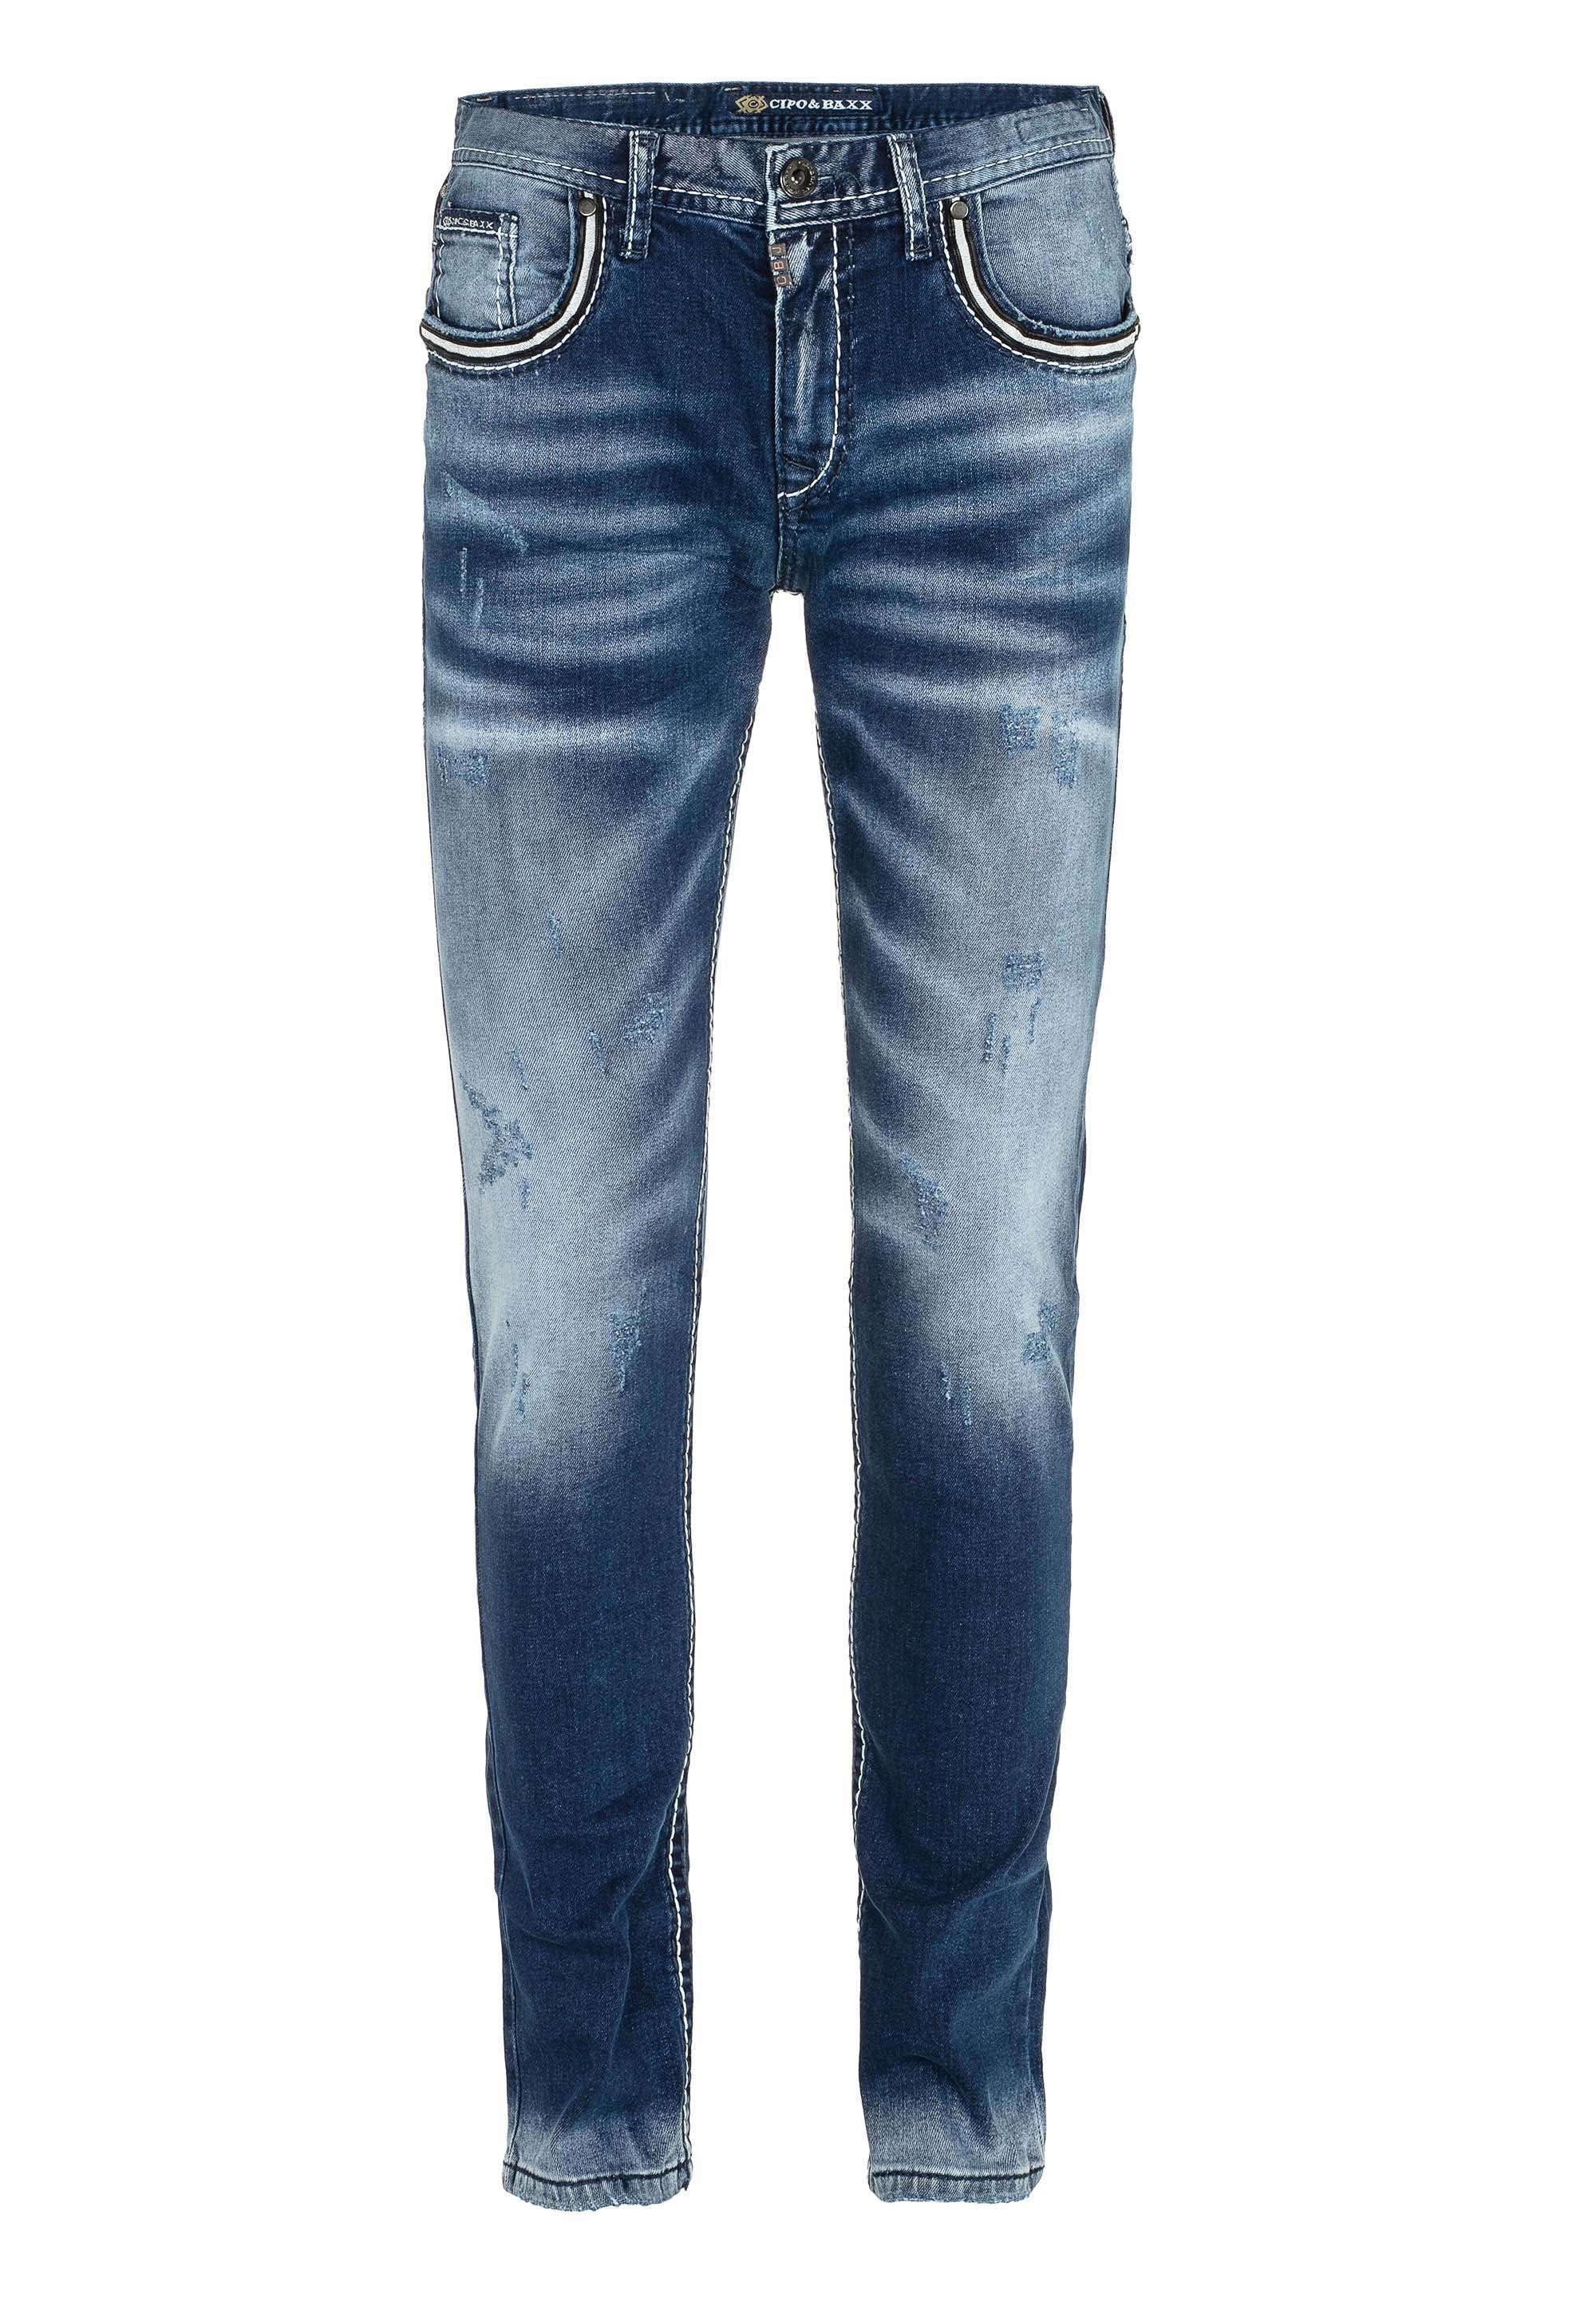 & Worn in im Fit Baxx Look Cipo Slim-fit-Jeans Straight Washed